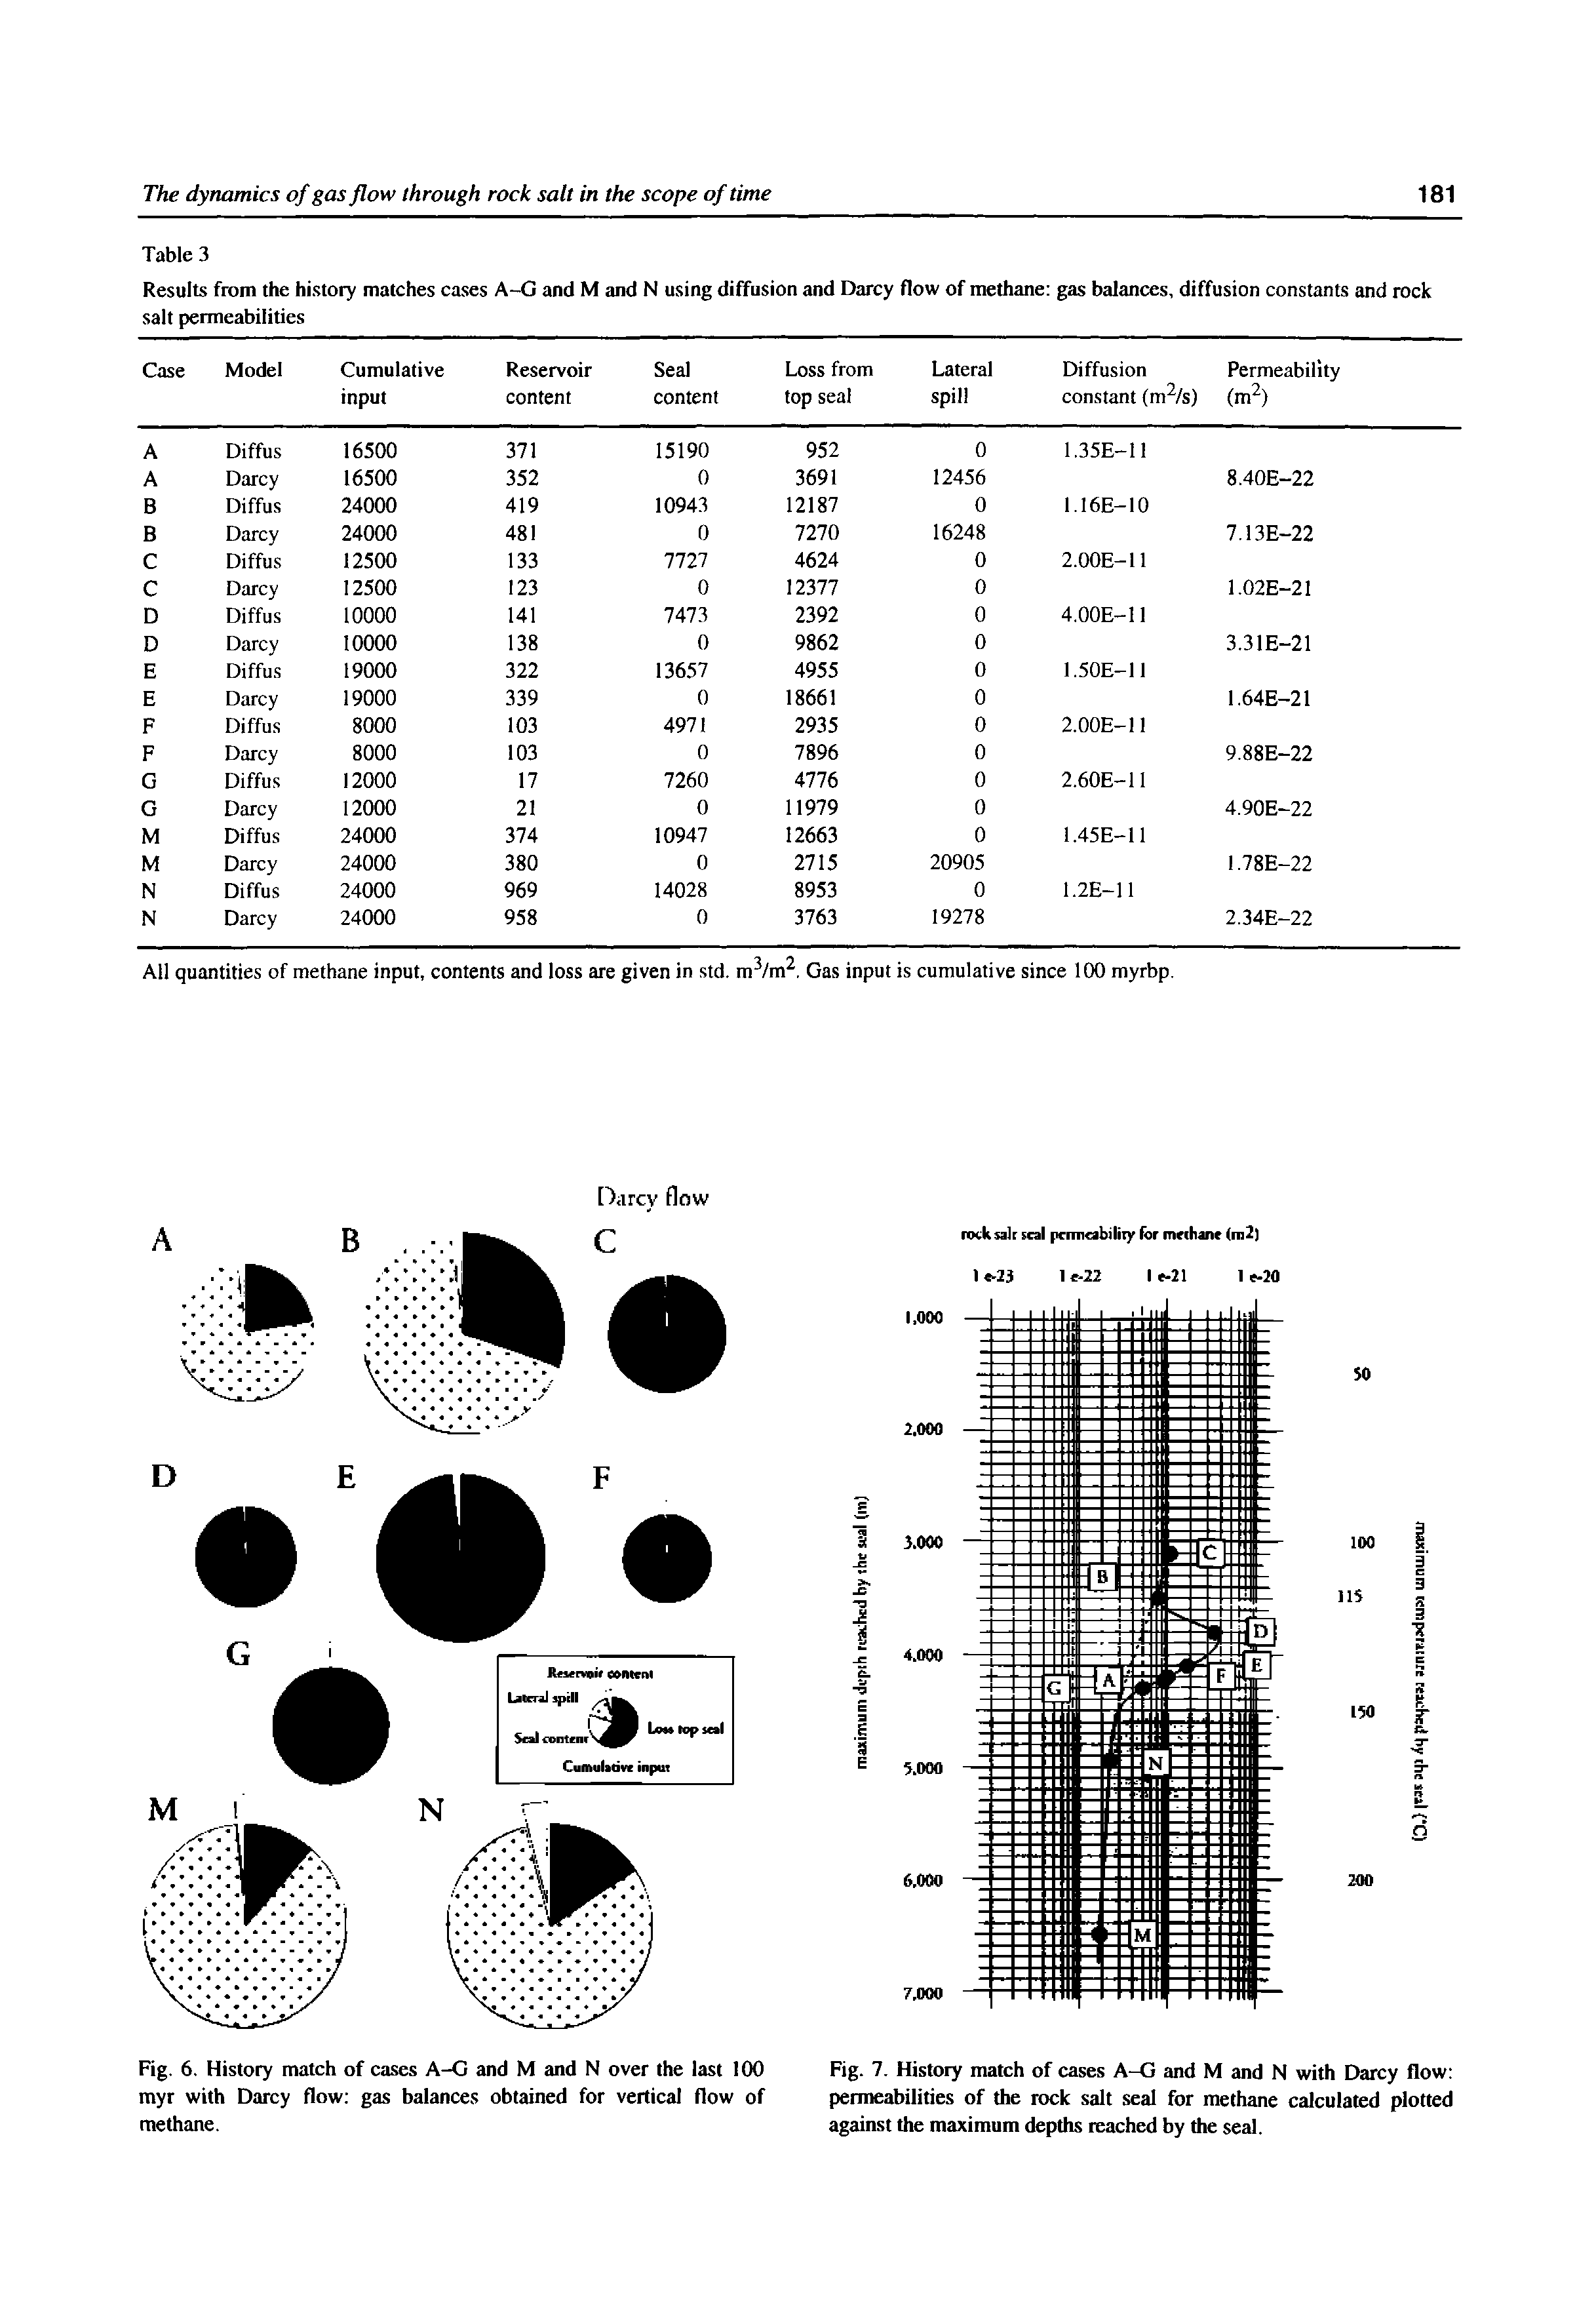 Fig. 7. History match of cases A-G and M and N with Darcy flow permeabilities of the rock salt seal for methane calculated plotted against the maximum depths reached by the seal.